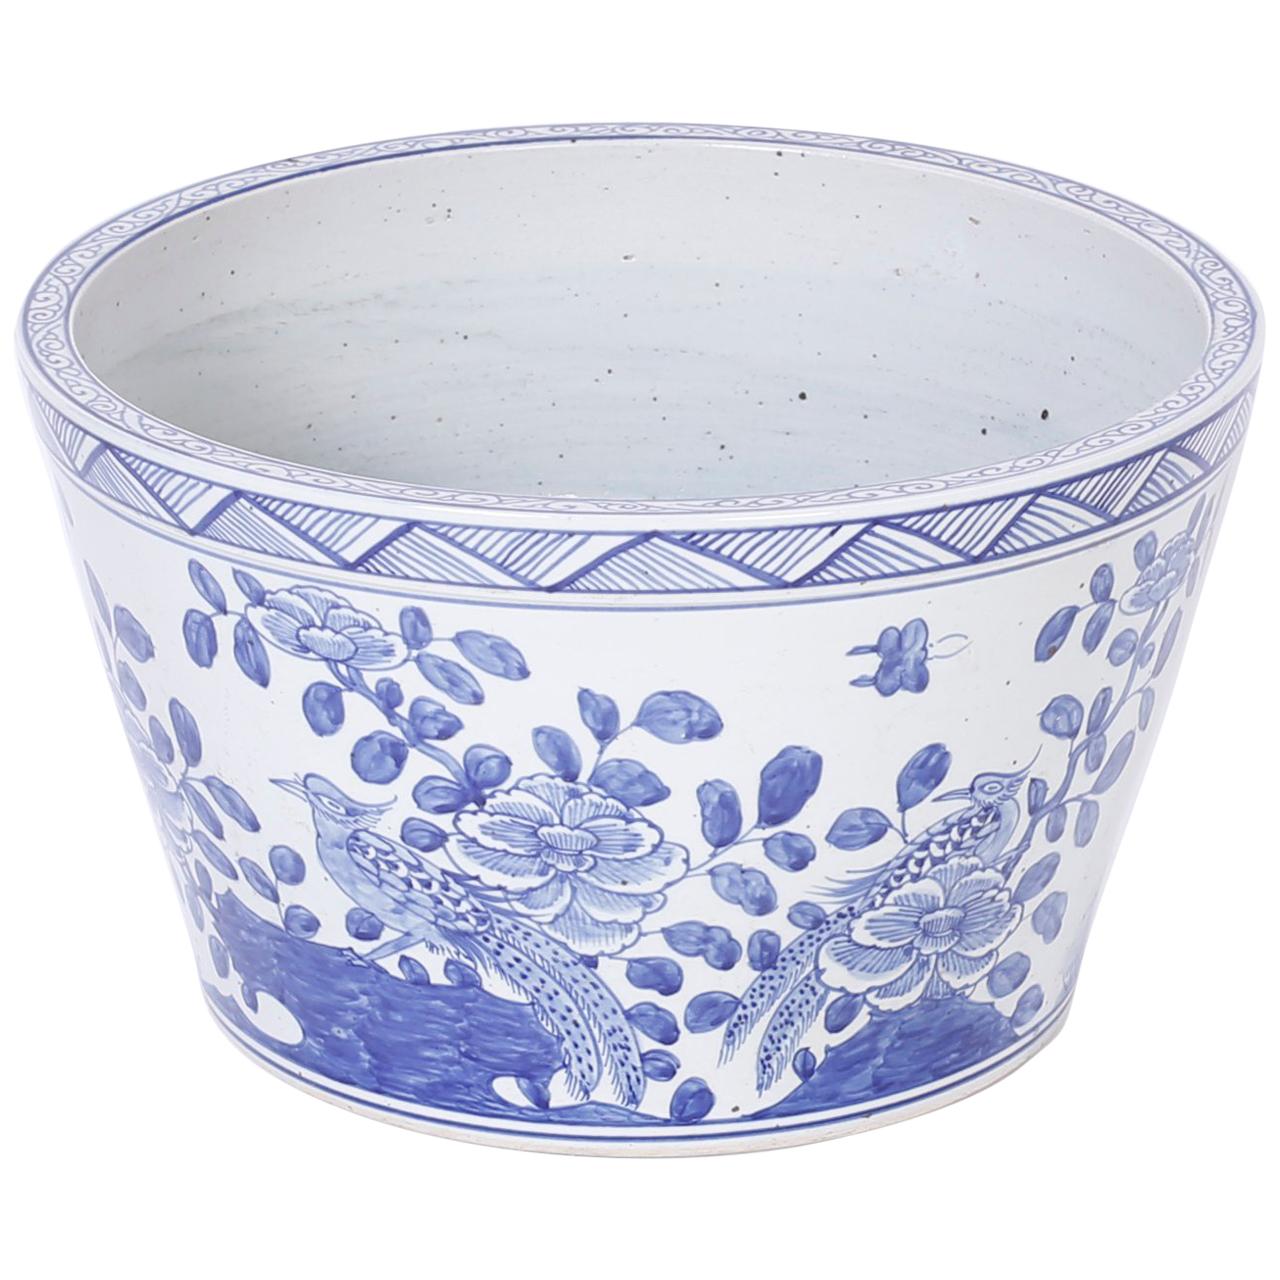 Large Chinese Blue and White Porcelain Bowl or Planter